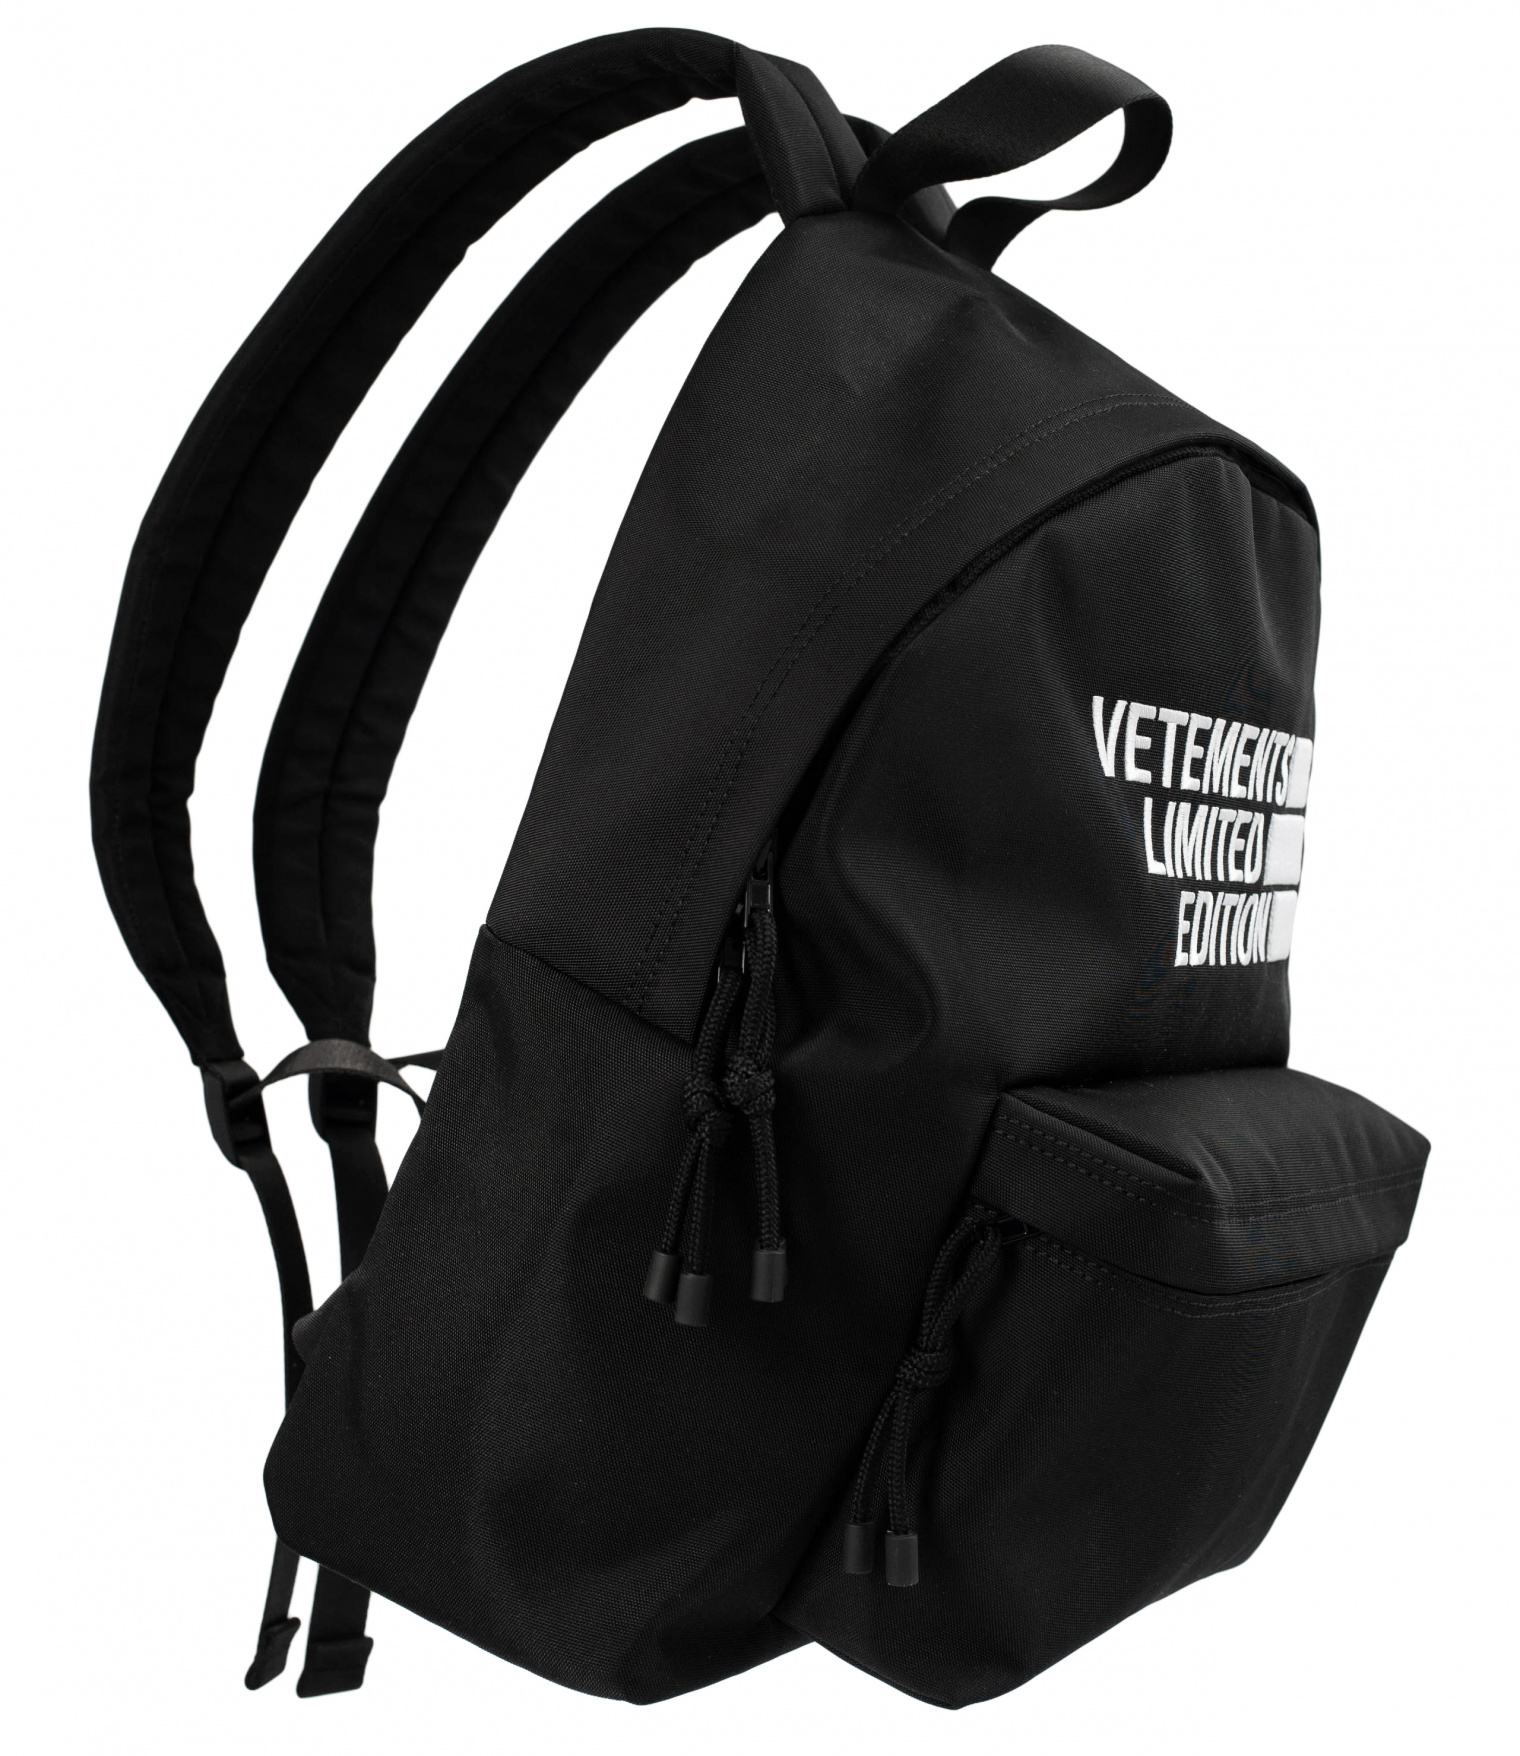 VETEMENTS Limited Edition Black Backpack